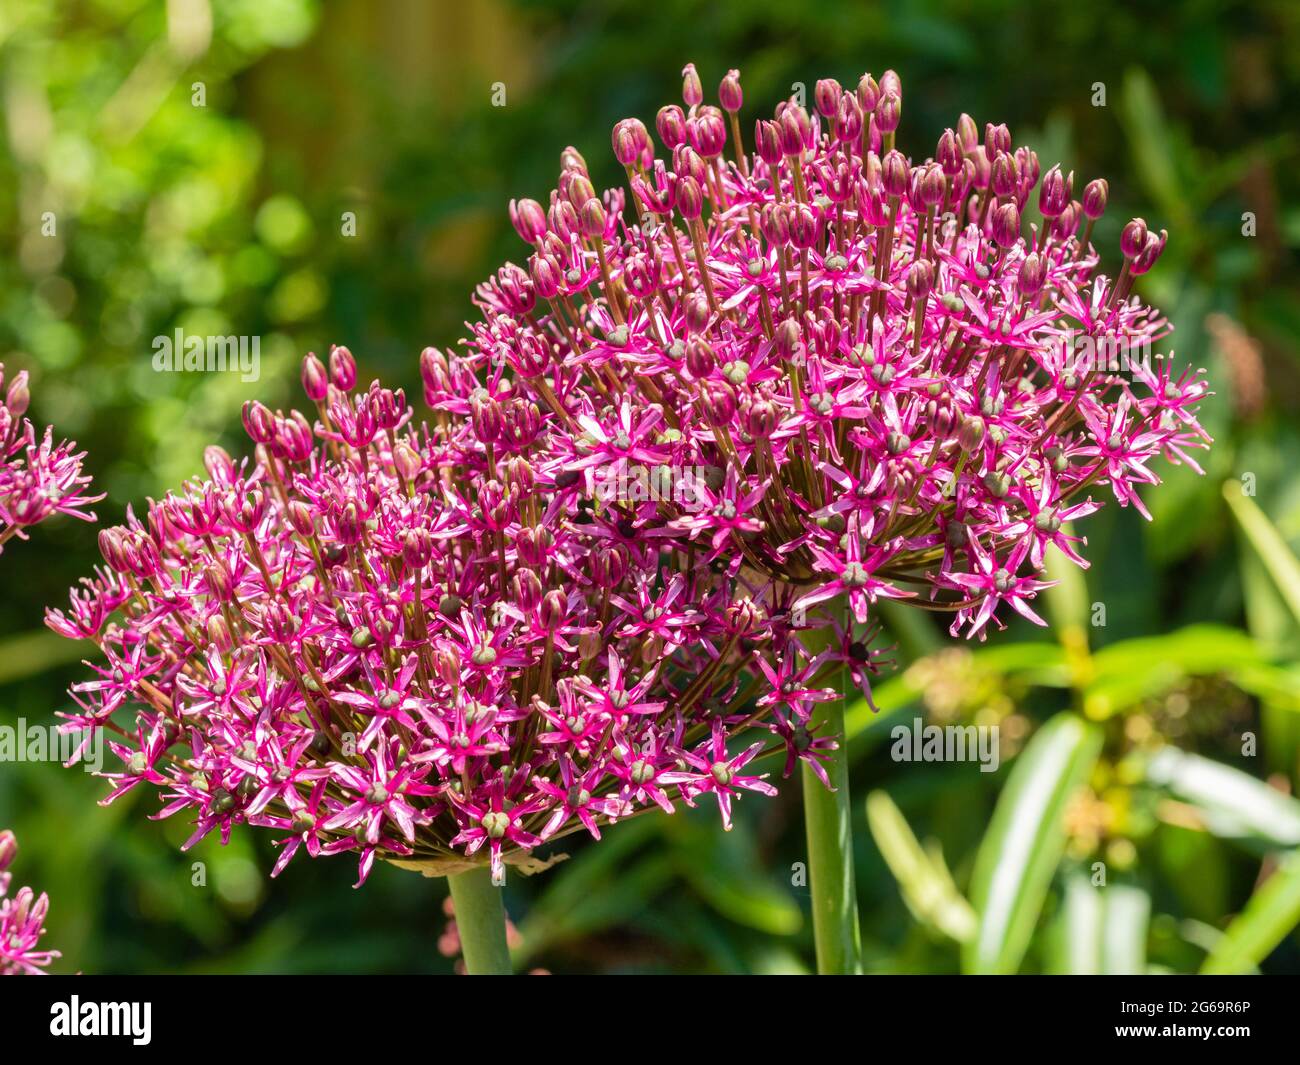 Inverted bowl shaped flower heads of the hardy, early summer flowering ornamental onion, Allium 'Miami' Stock Photo